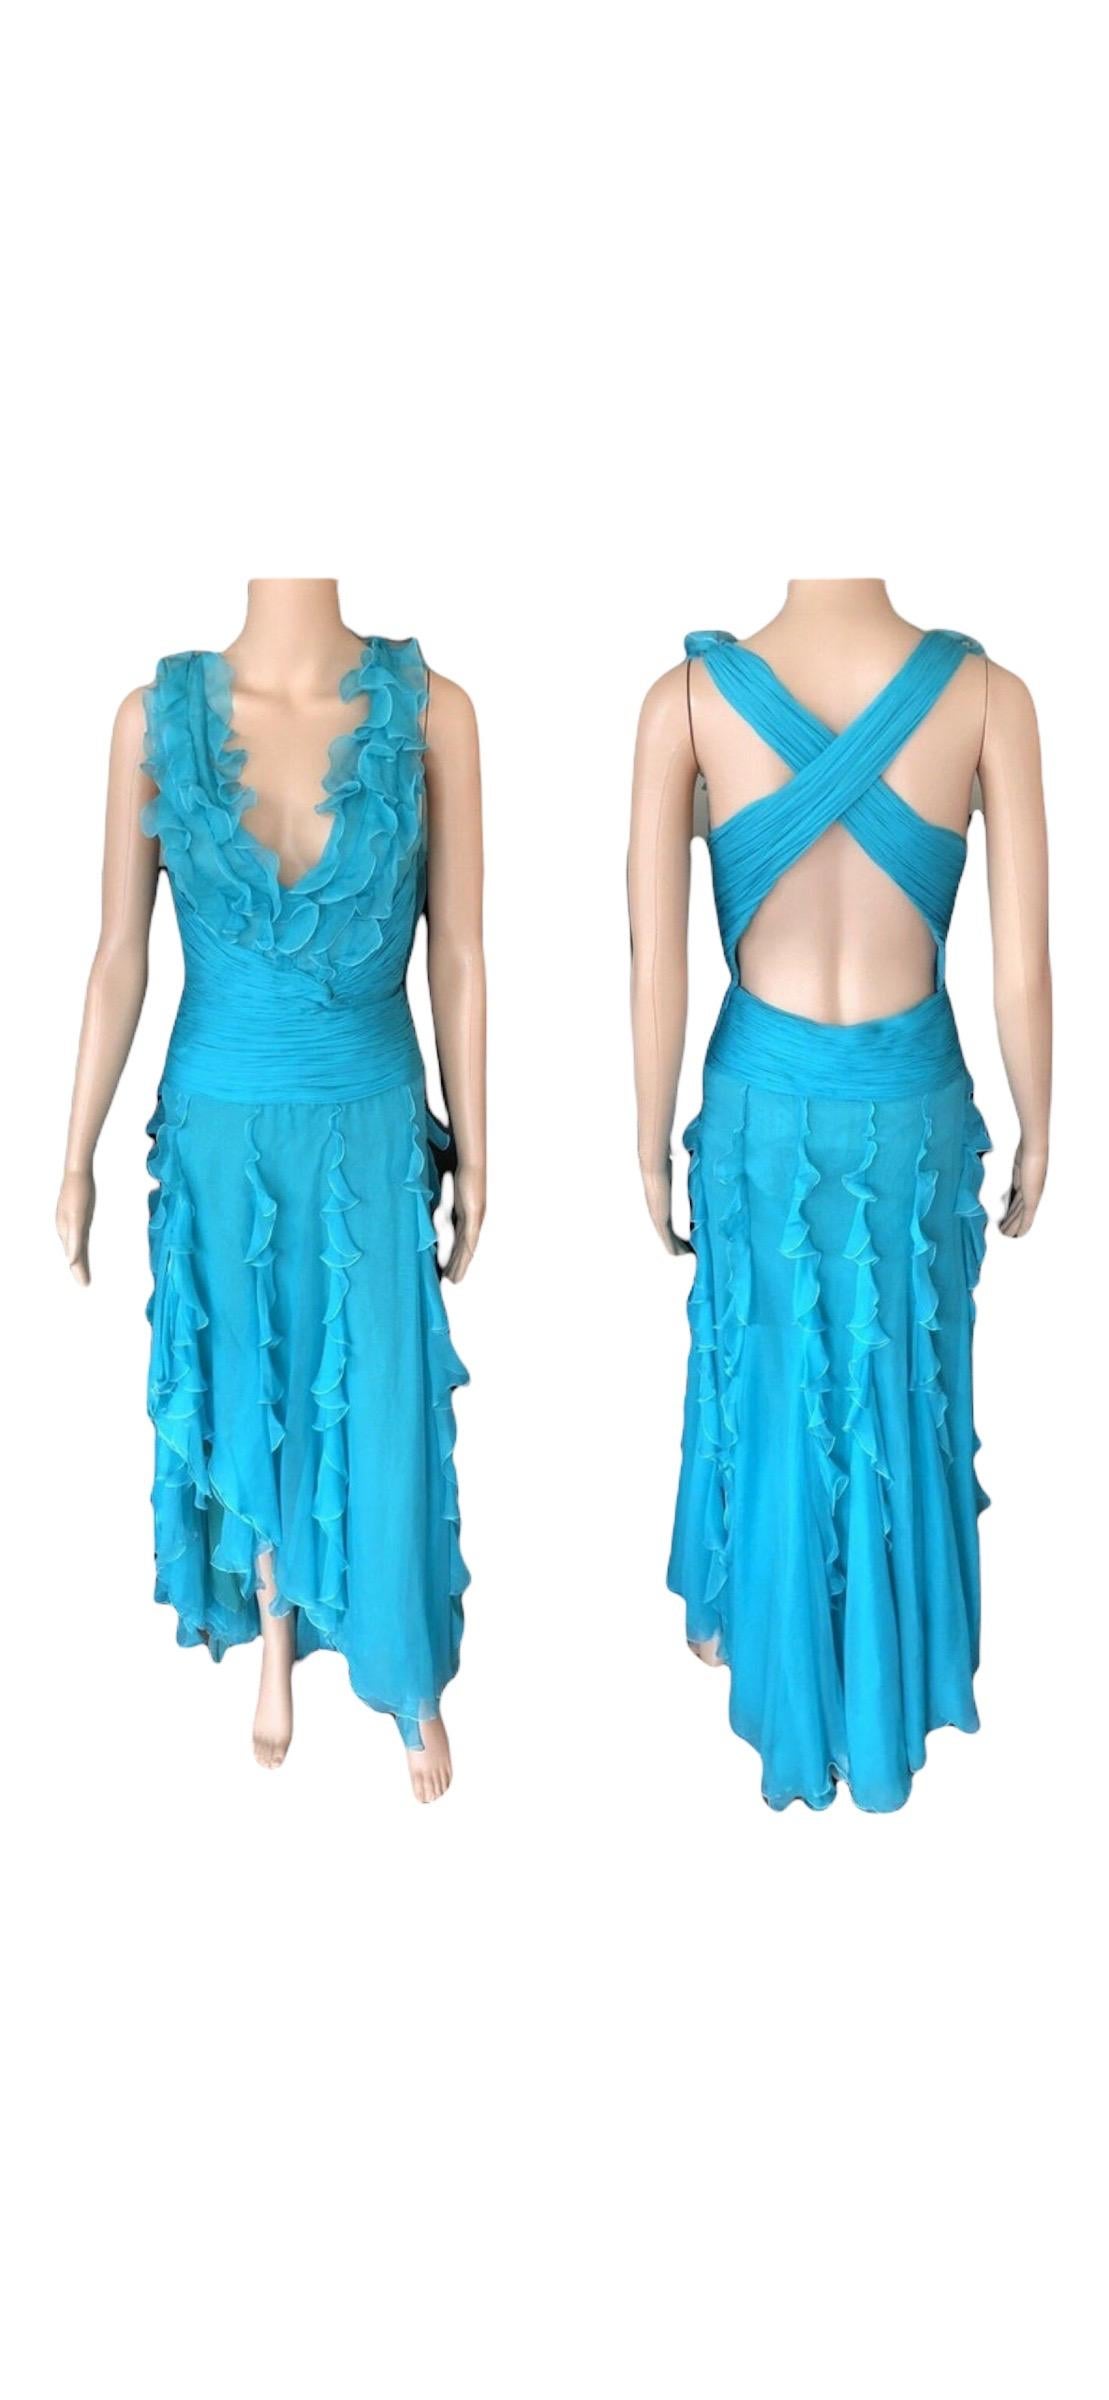 Versace S/S 2004 Runway Plunged Halter Open Back Ruffles Evening Dress Gown Size IT 40

Versace silk sleeveless maxi dress with halter neck, ruffle accents throughout and concealed zip closure at side.

